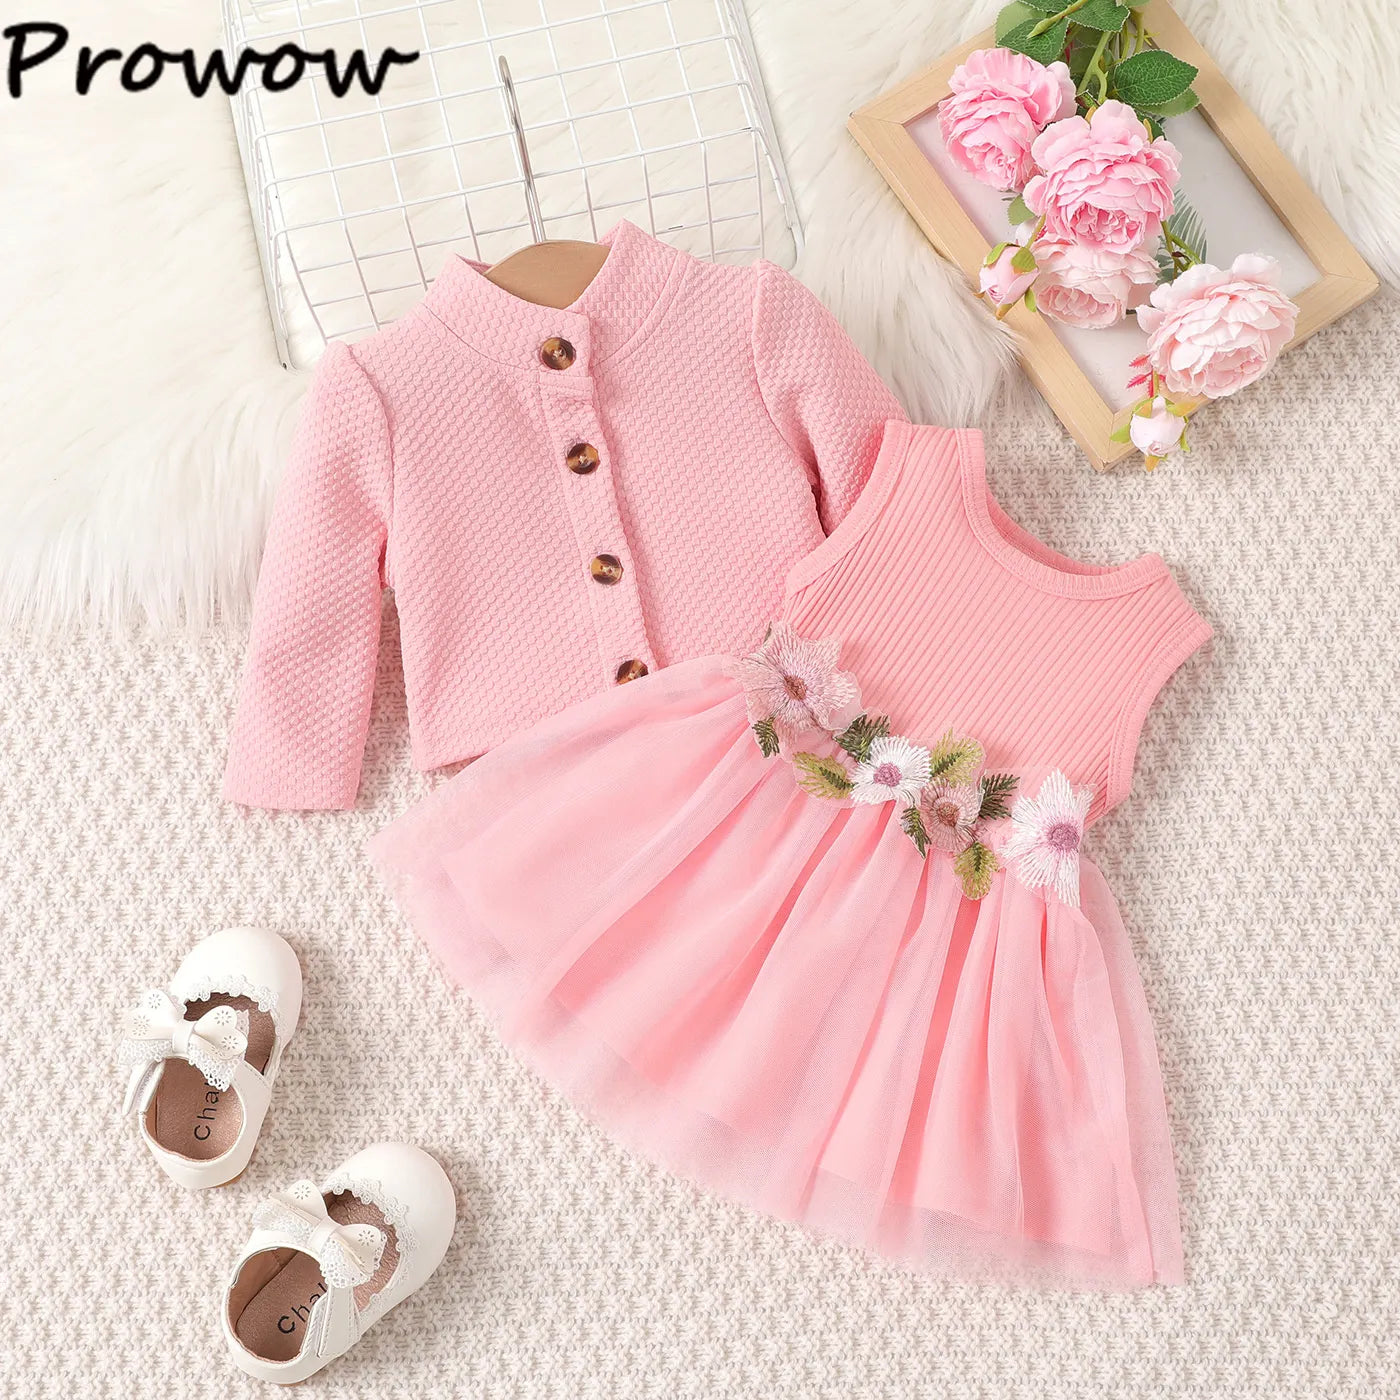 Prowow 3-24M Baby Dresses Pink Coat With Embroidery Flower Dress For Girls Spring Fall Toddler Dress Kids Baby Girls Clothes